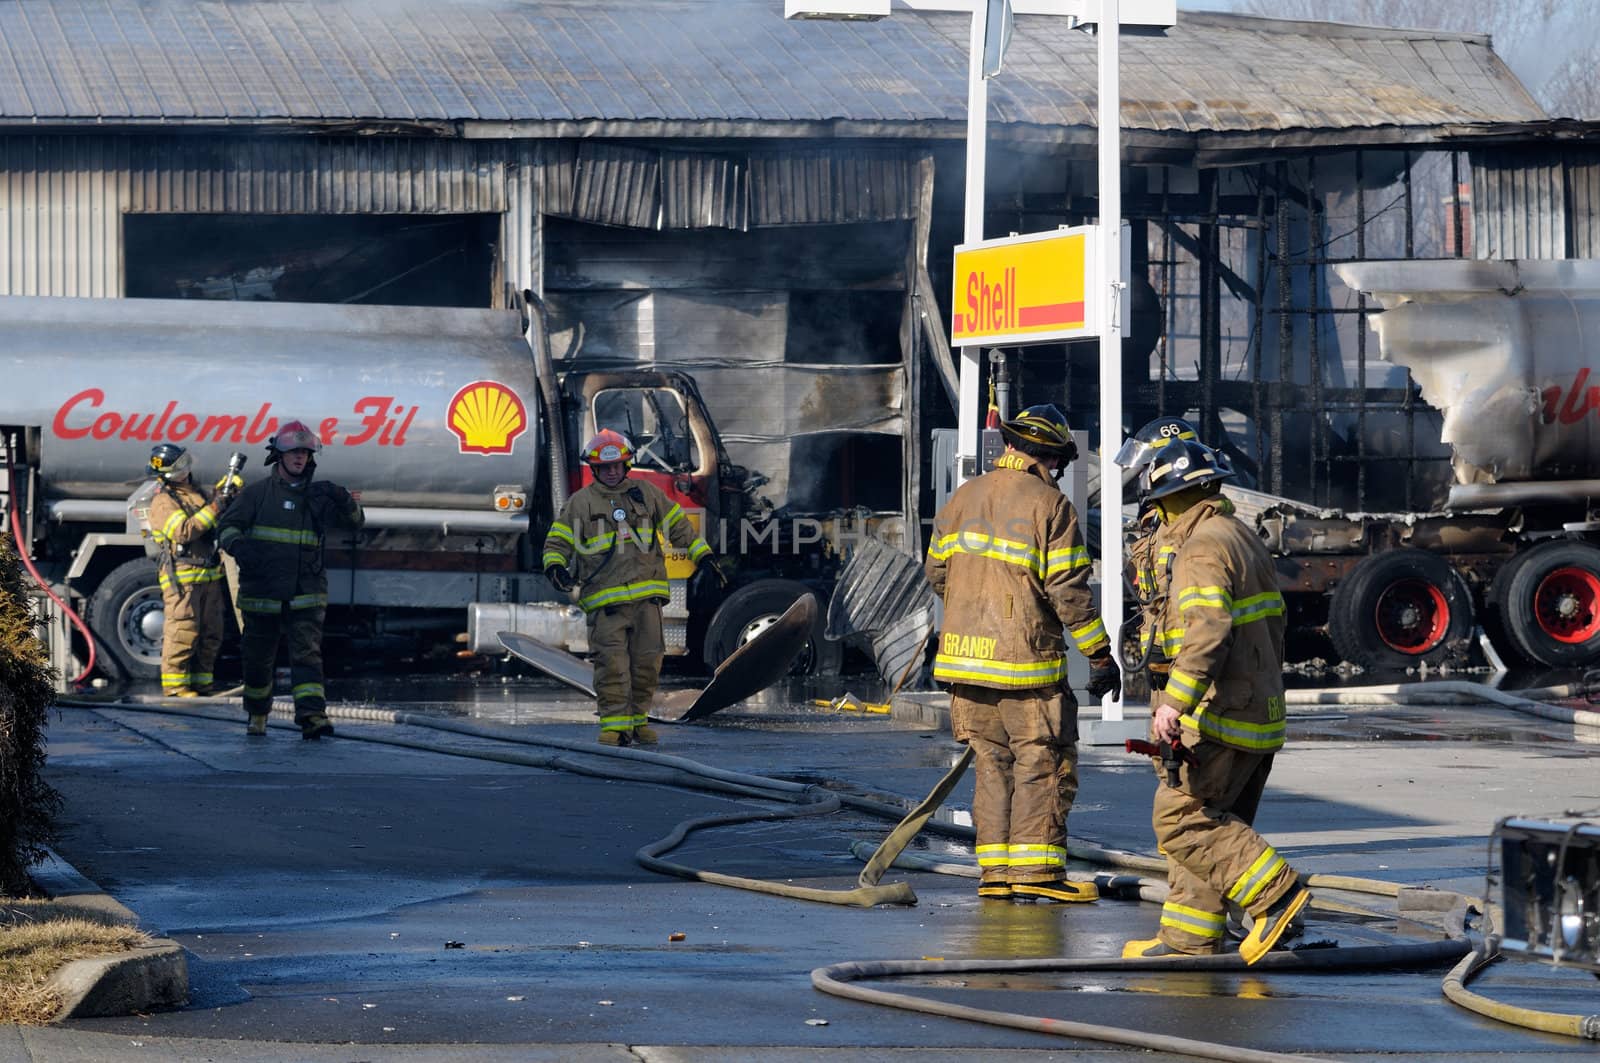 Firemen fighting a fire involving tank trucks
at a gas station Granby, Quebec, Canada on March 10th, 2010